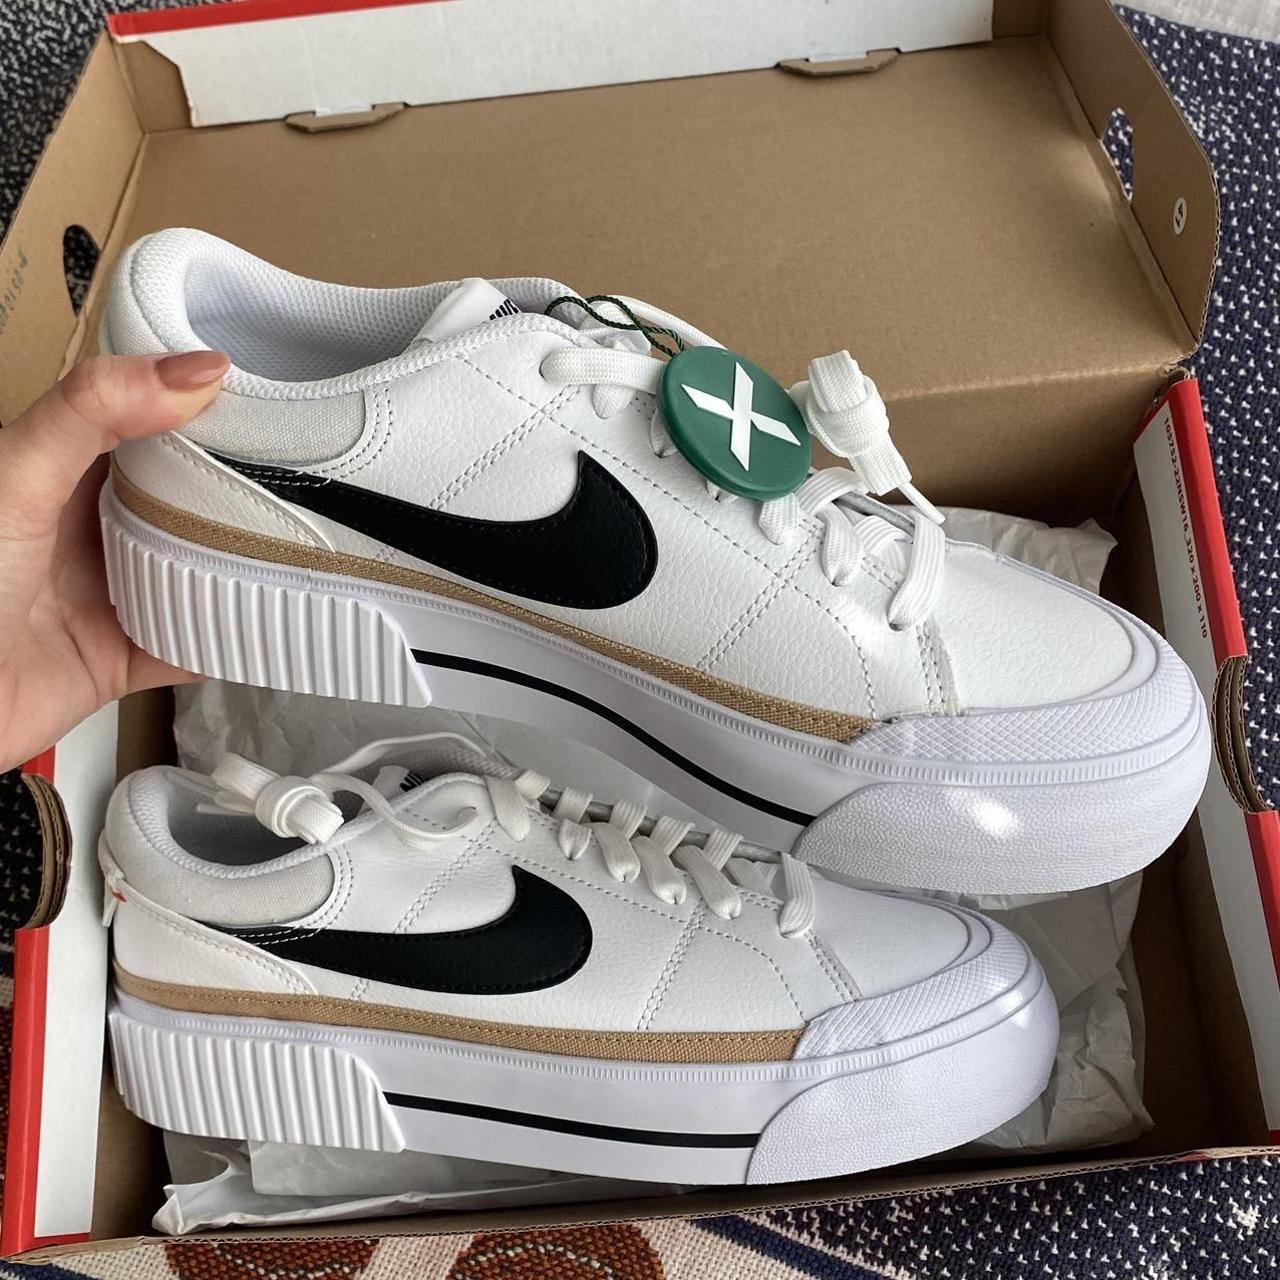 Nike Women's White and Black Trainers